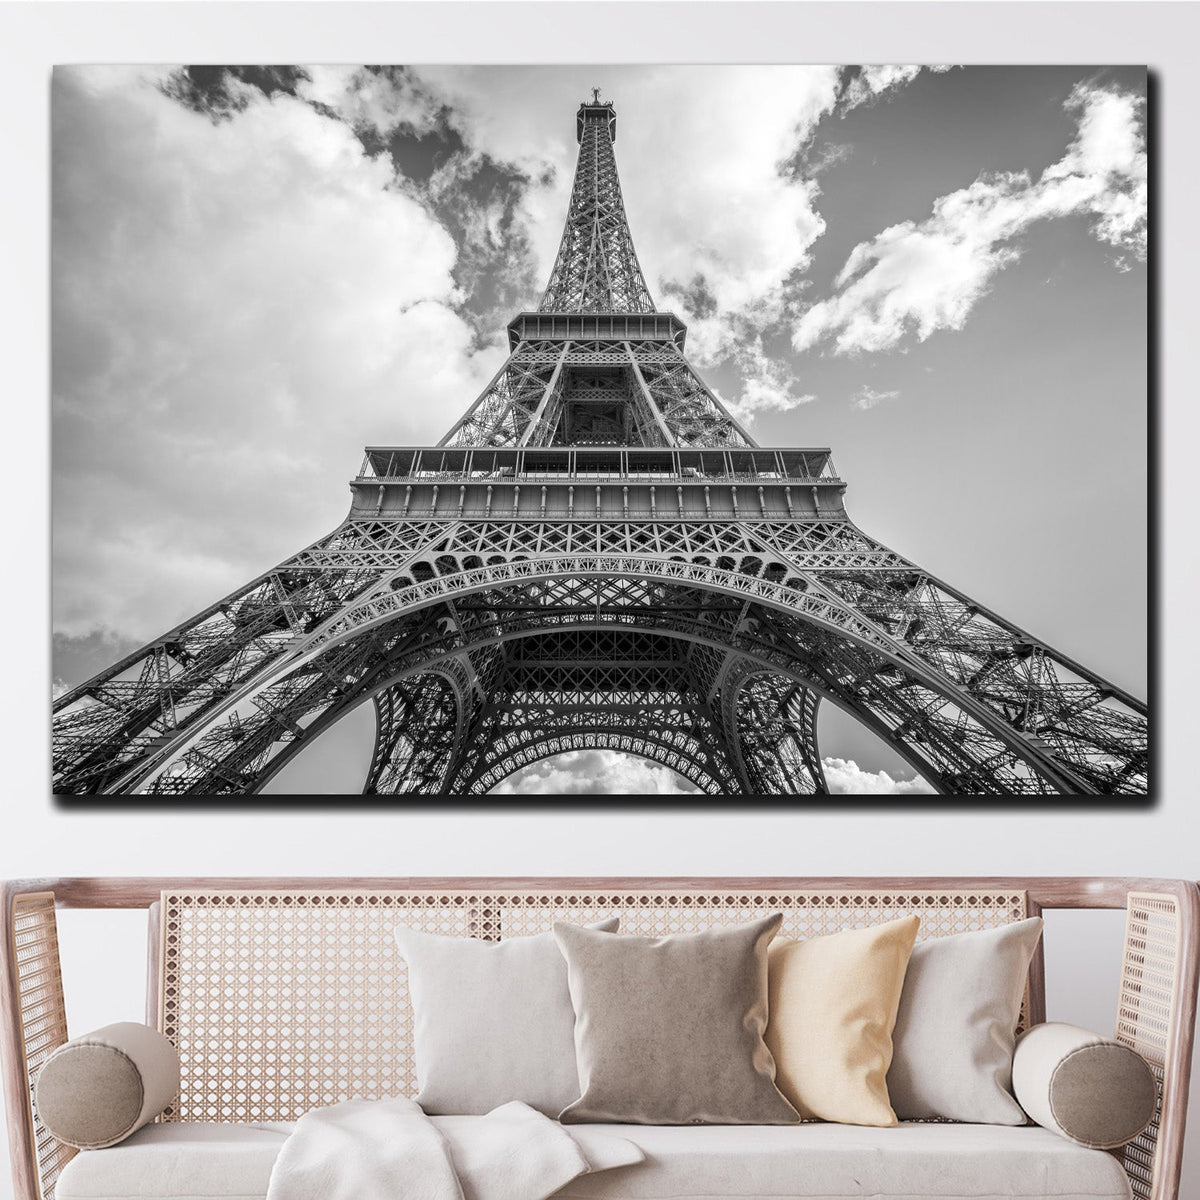 https://cdn.shopify.com/s/files/1/0387/9986/8044/products/TheIconicEiffelTowerCanvasArtprintStretched-2.jpg